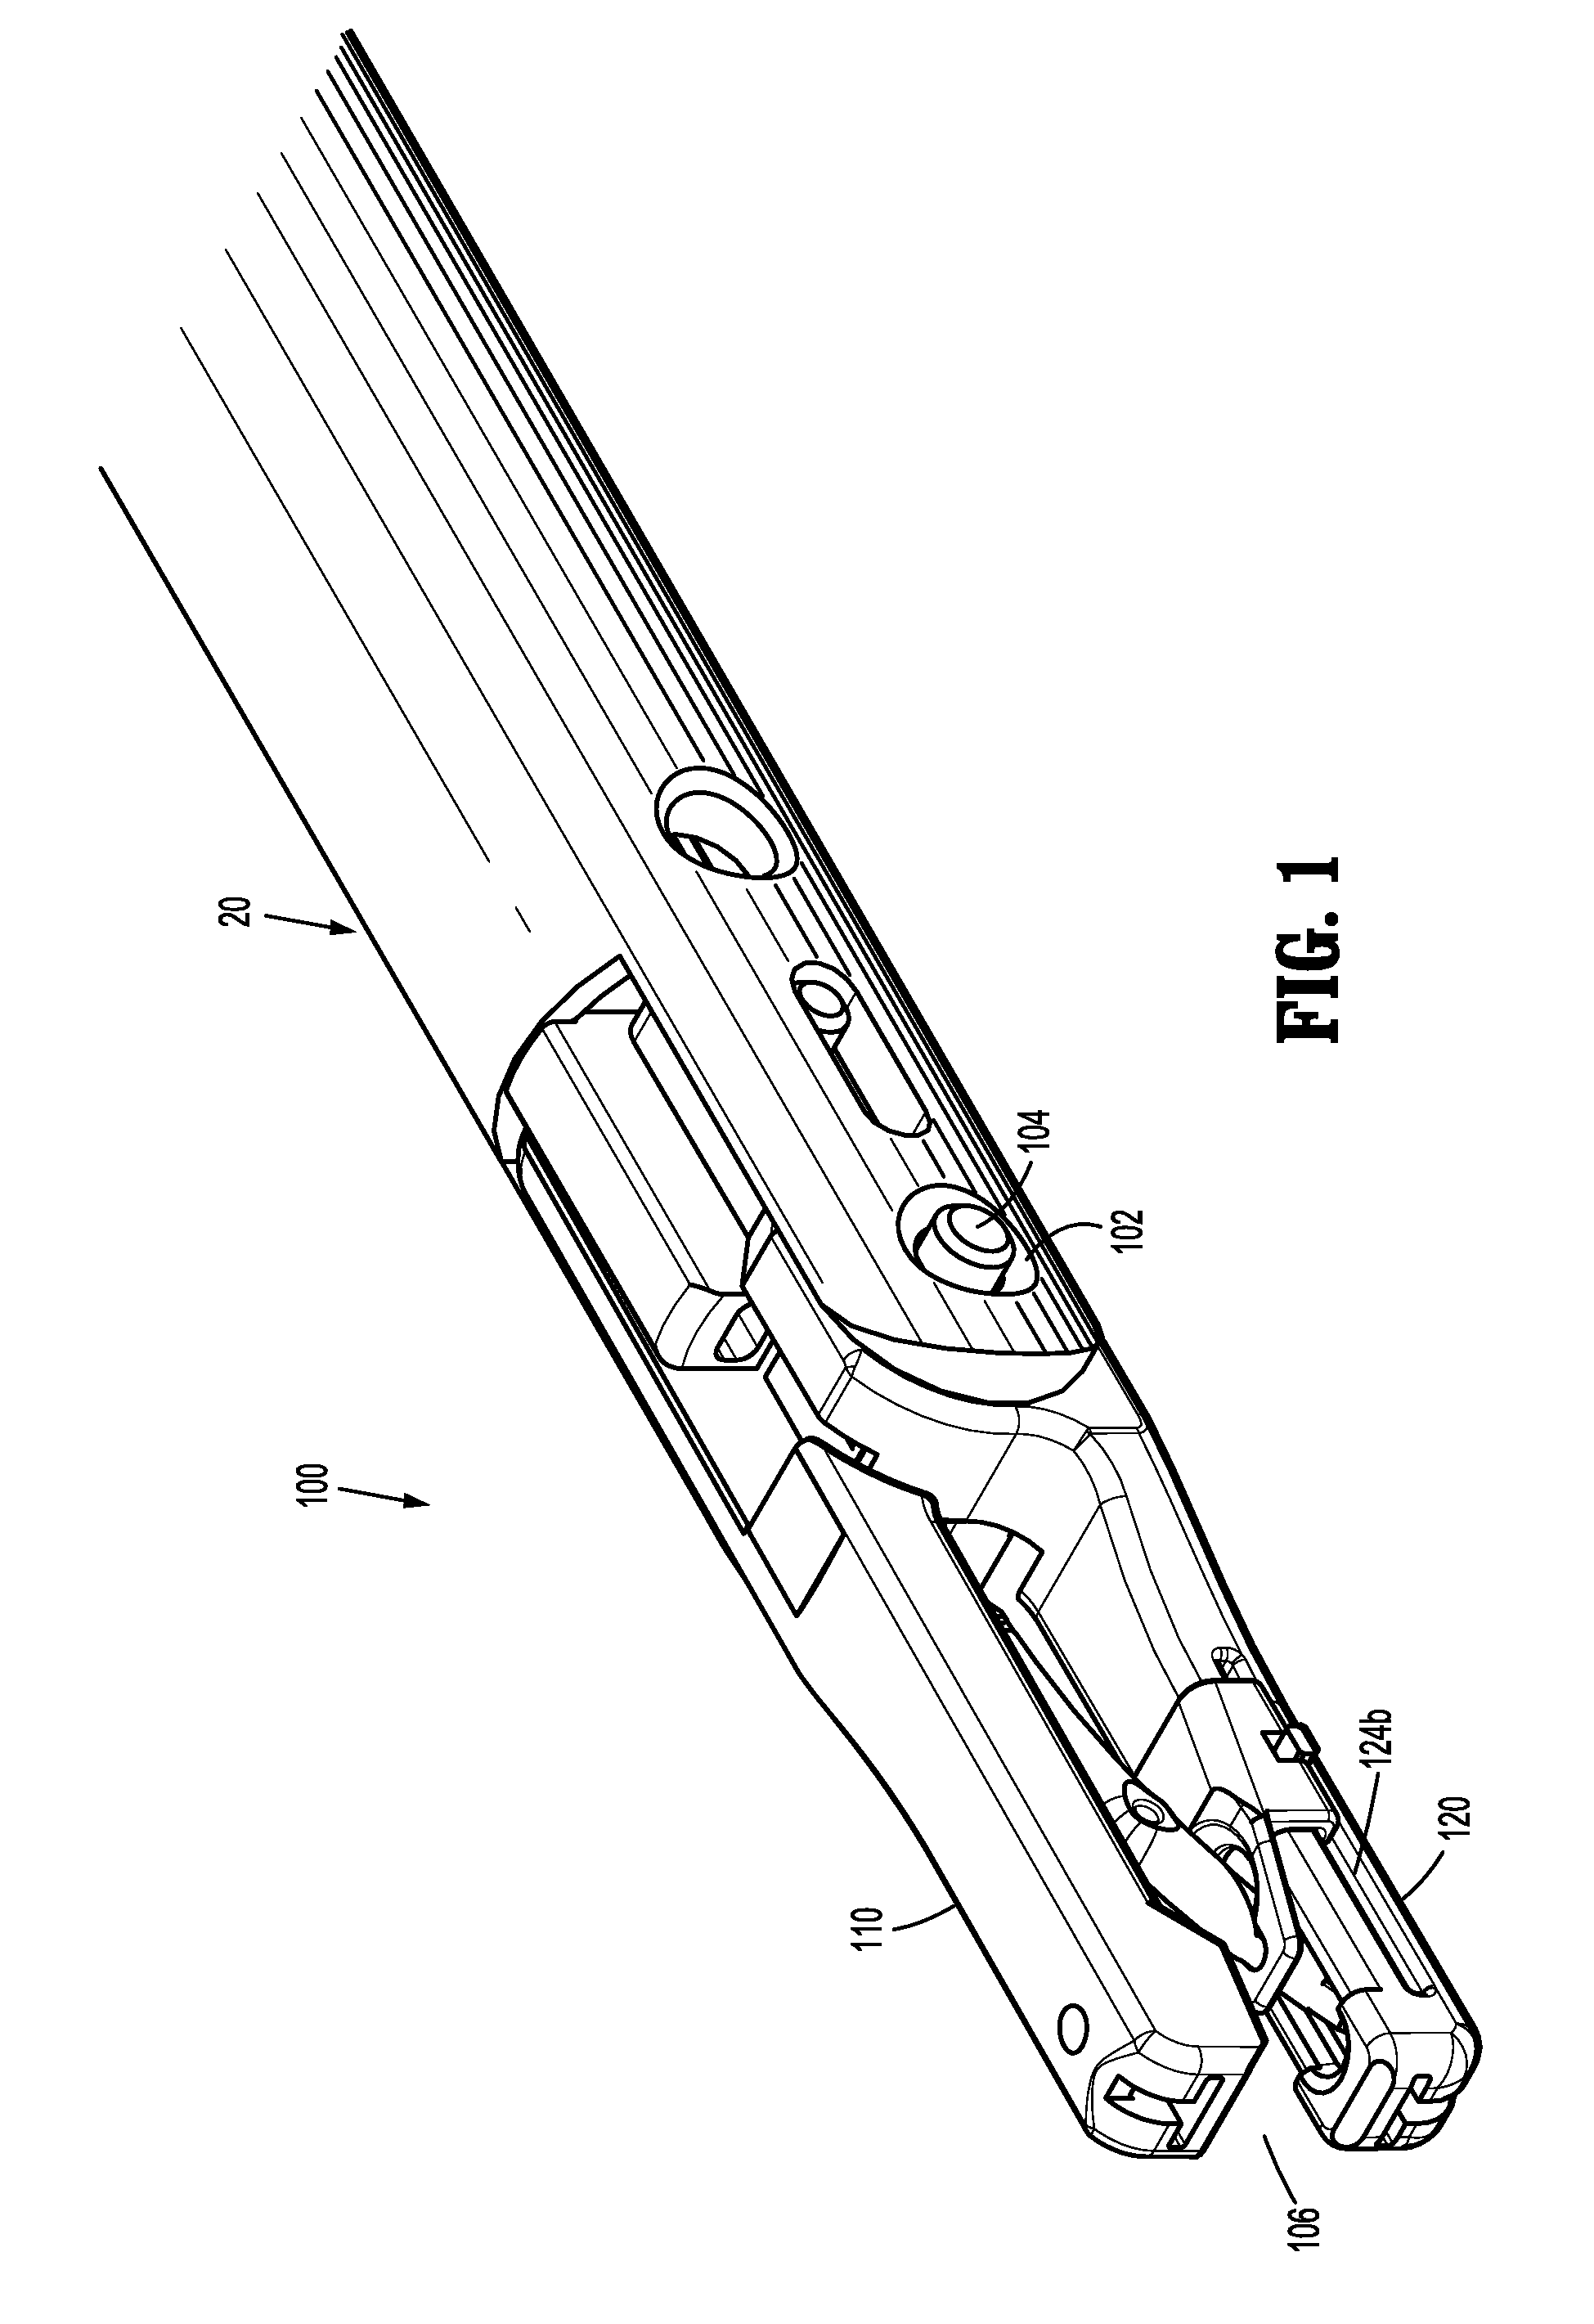 Suturing Device with Deployable Needle